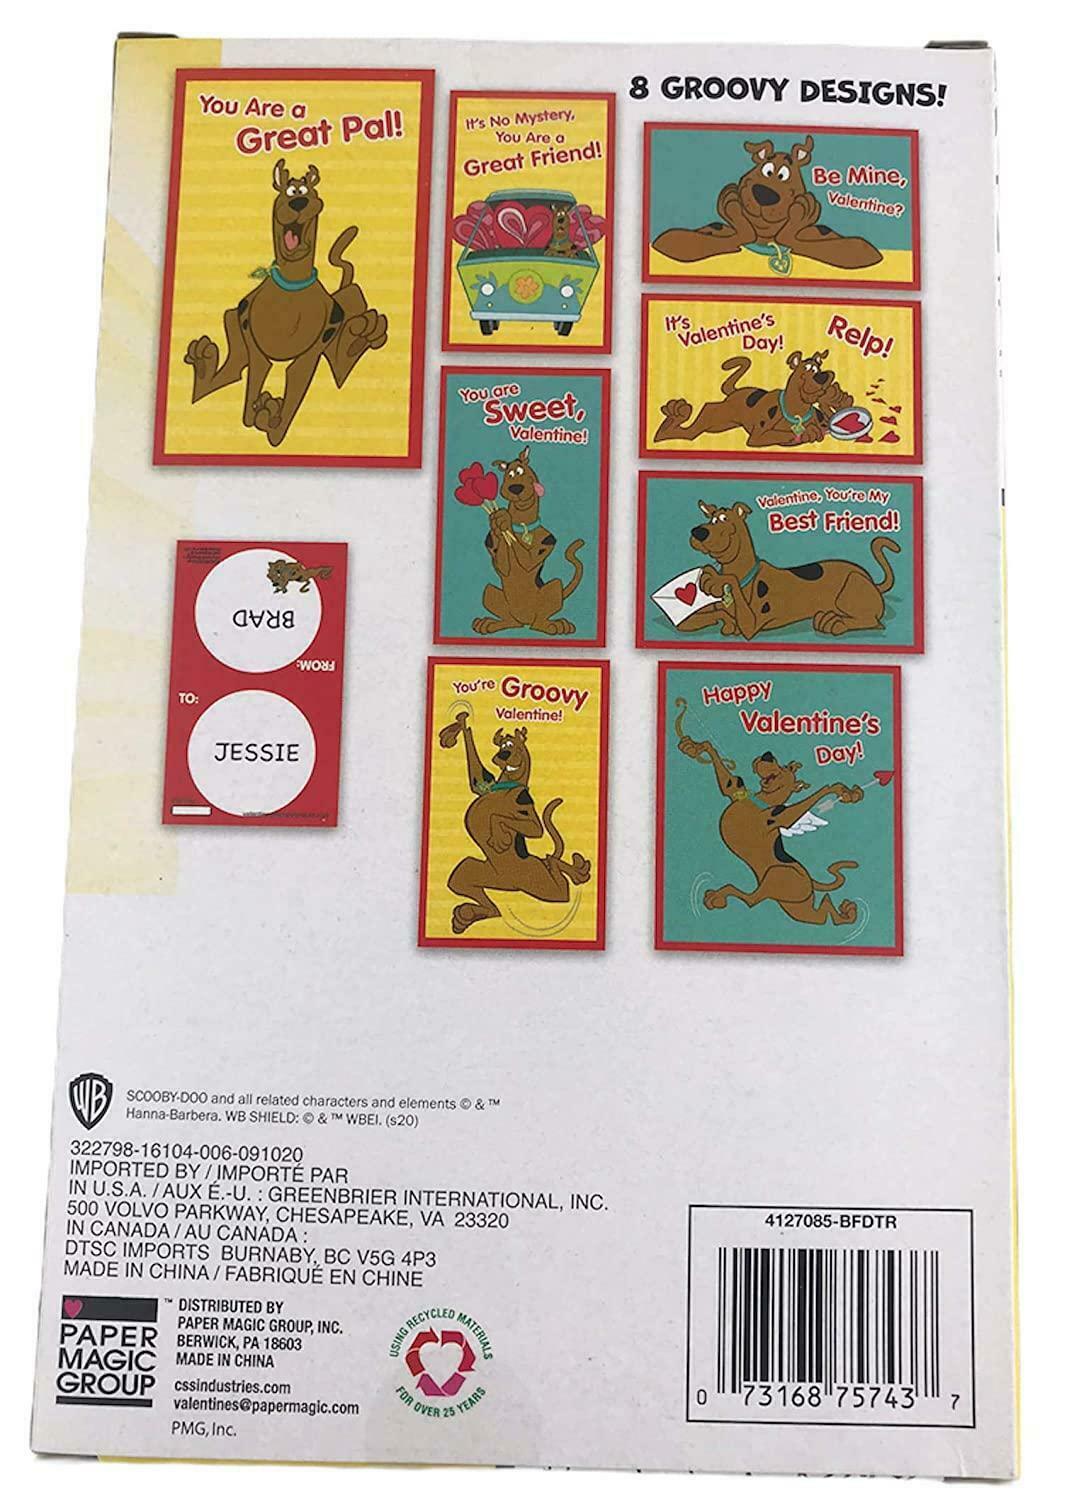 Scooby Doo Valentines Day Classroom Exchange Cards 48 with 48 Heart Seals